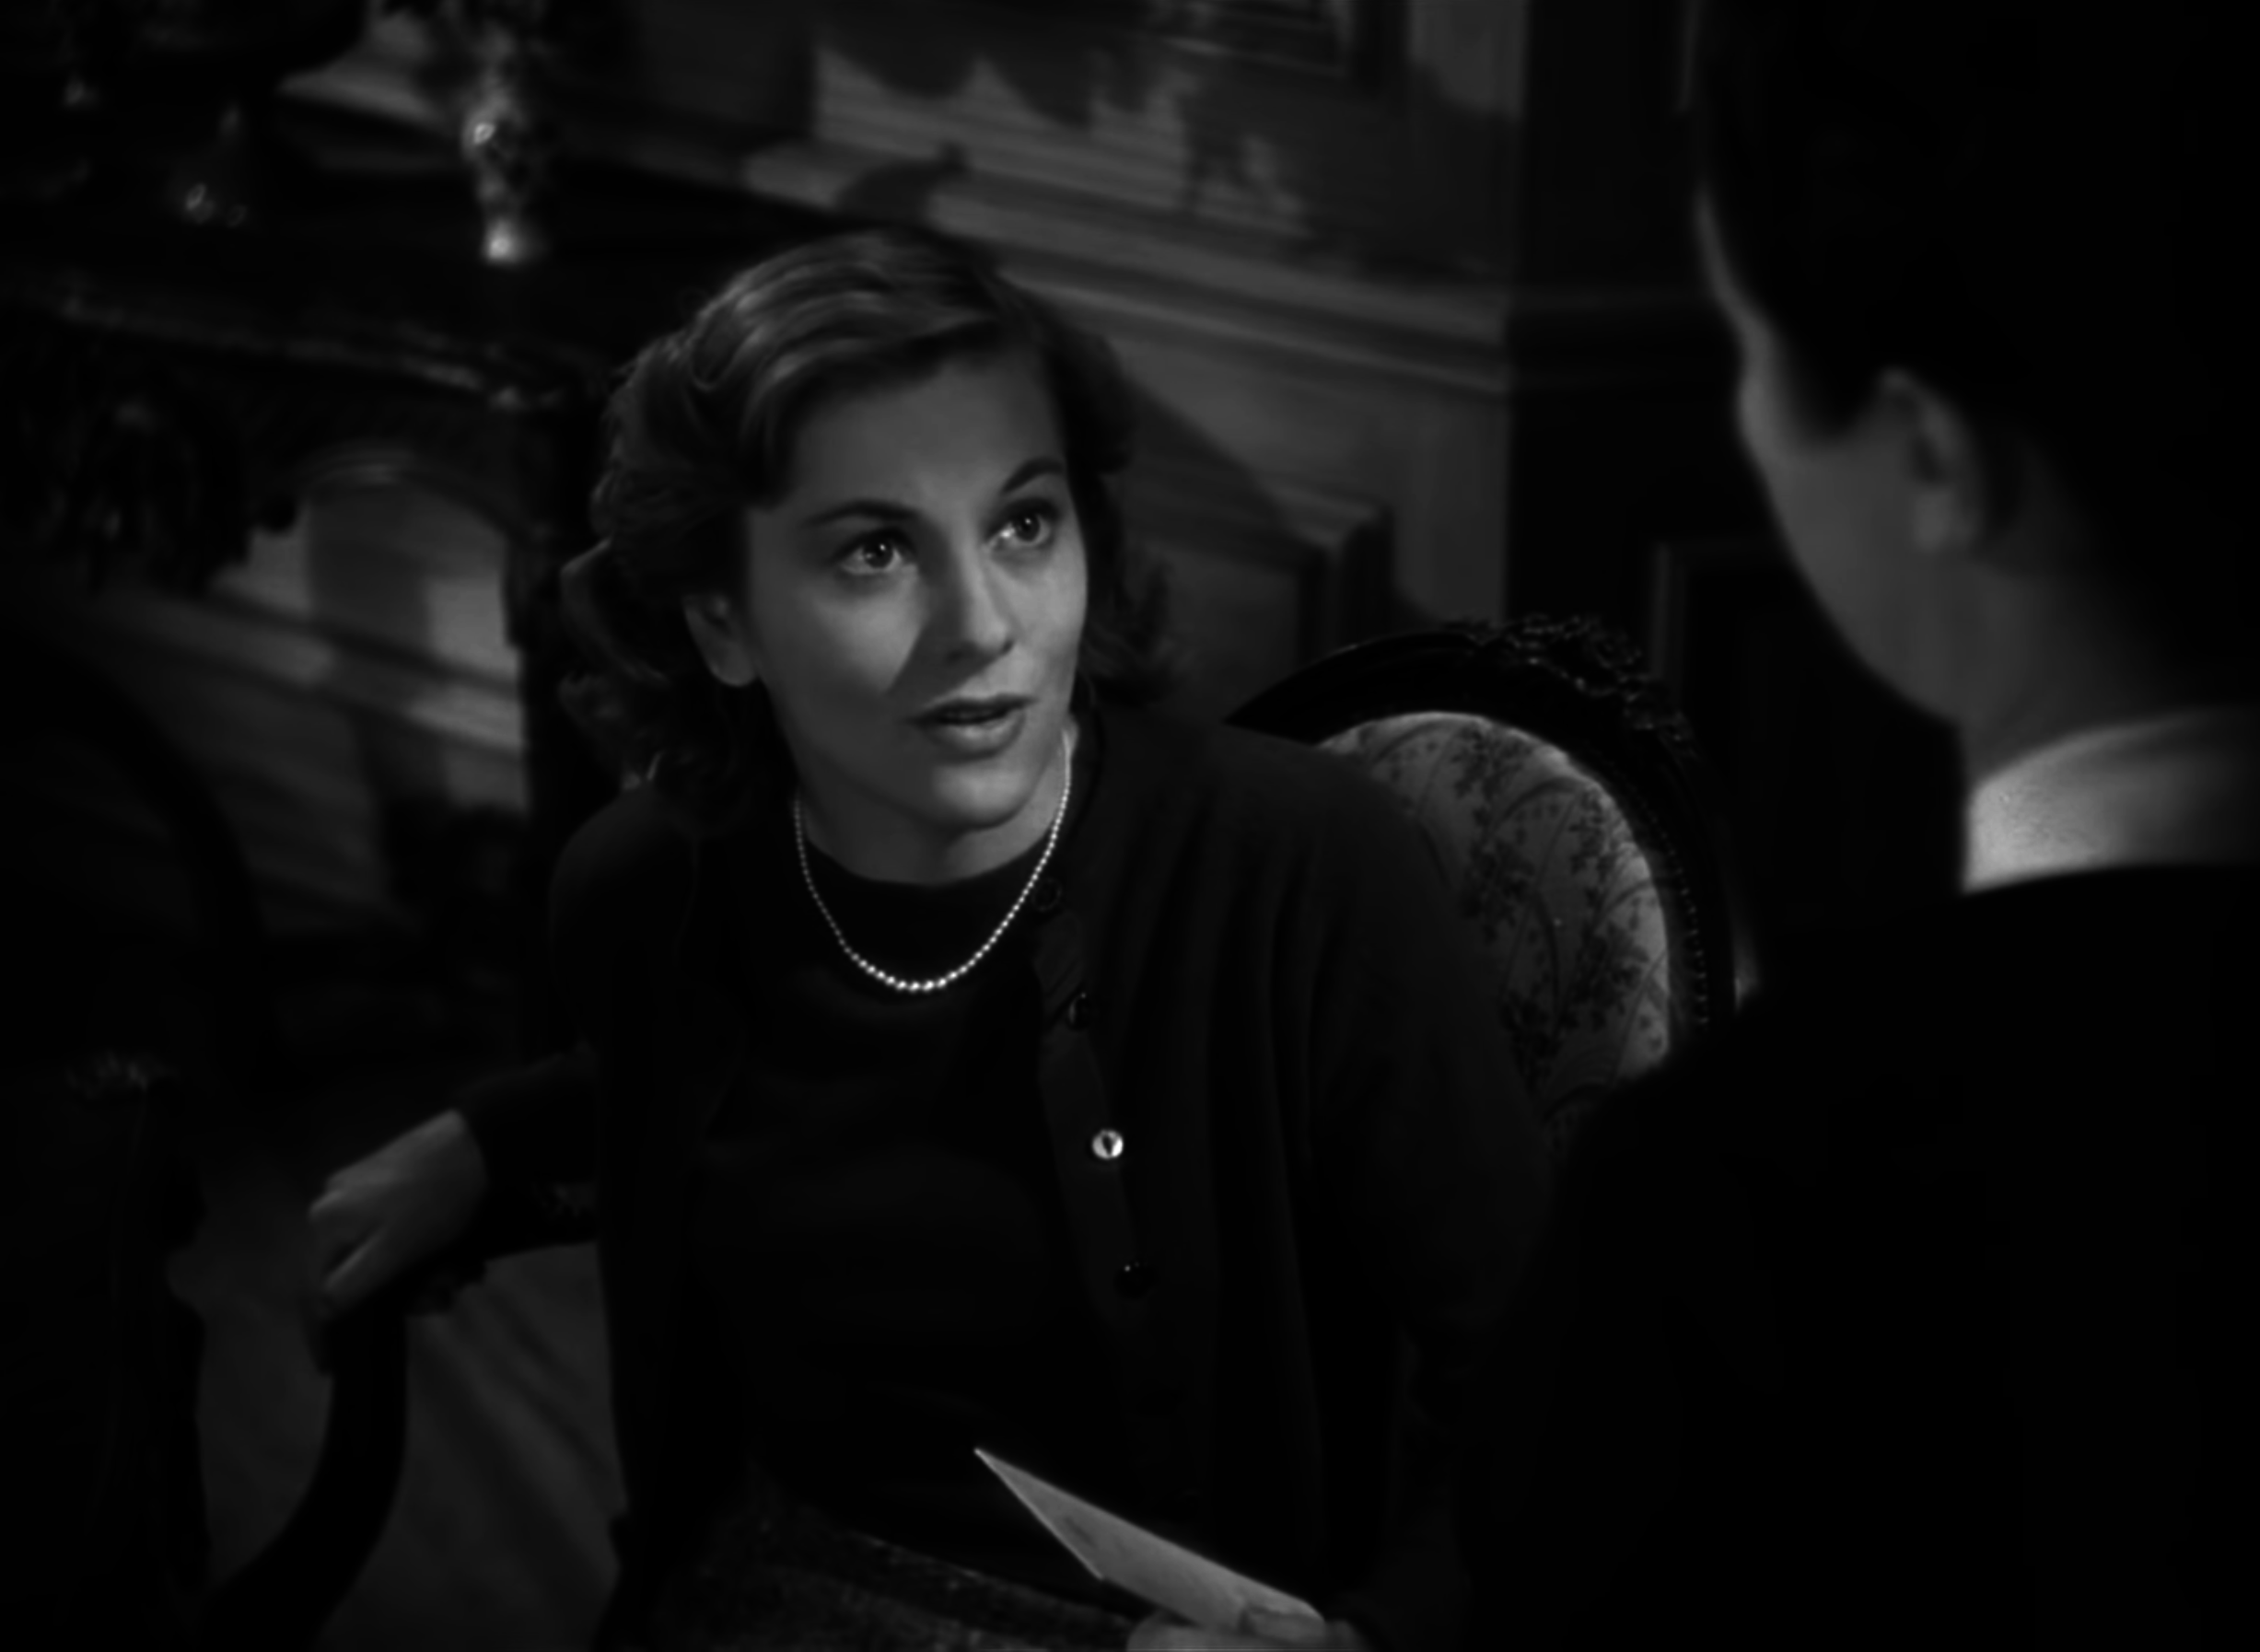 A young Joan Fontaine as Mrs de Winter sitting in a chair looks up at another woman standing over her, whose face we can&#x27;t see